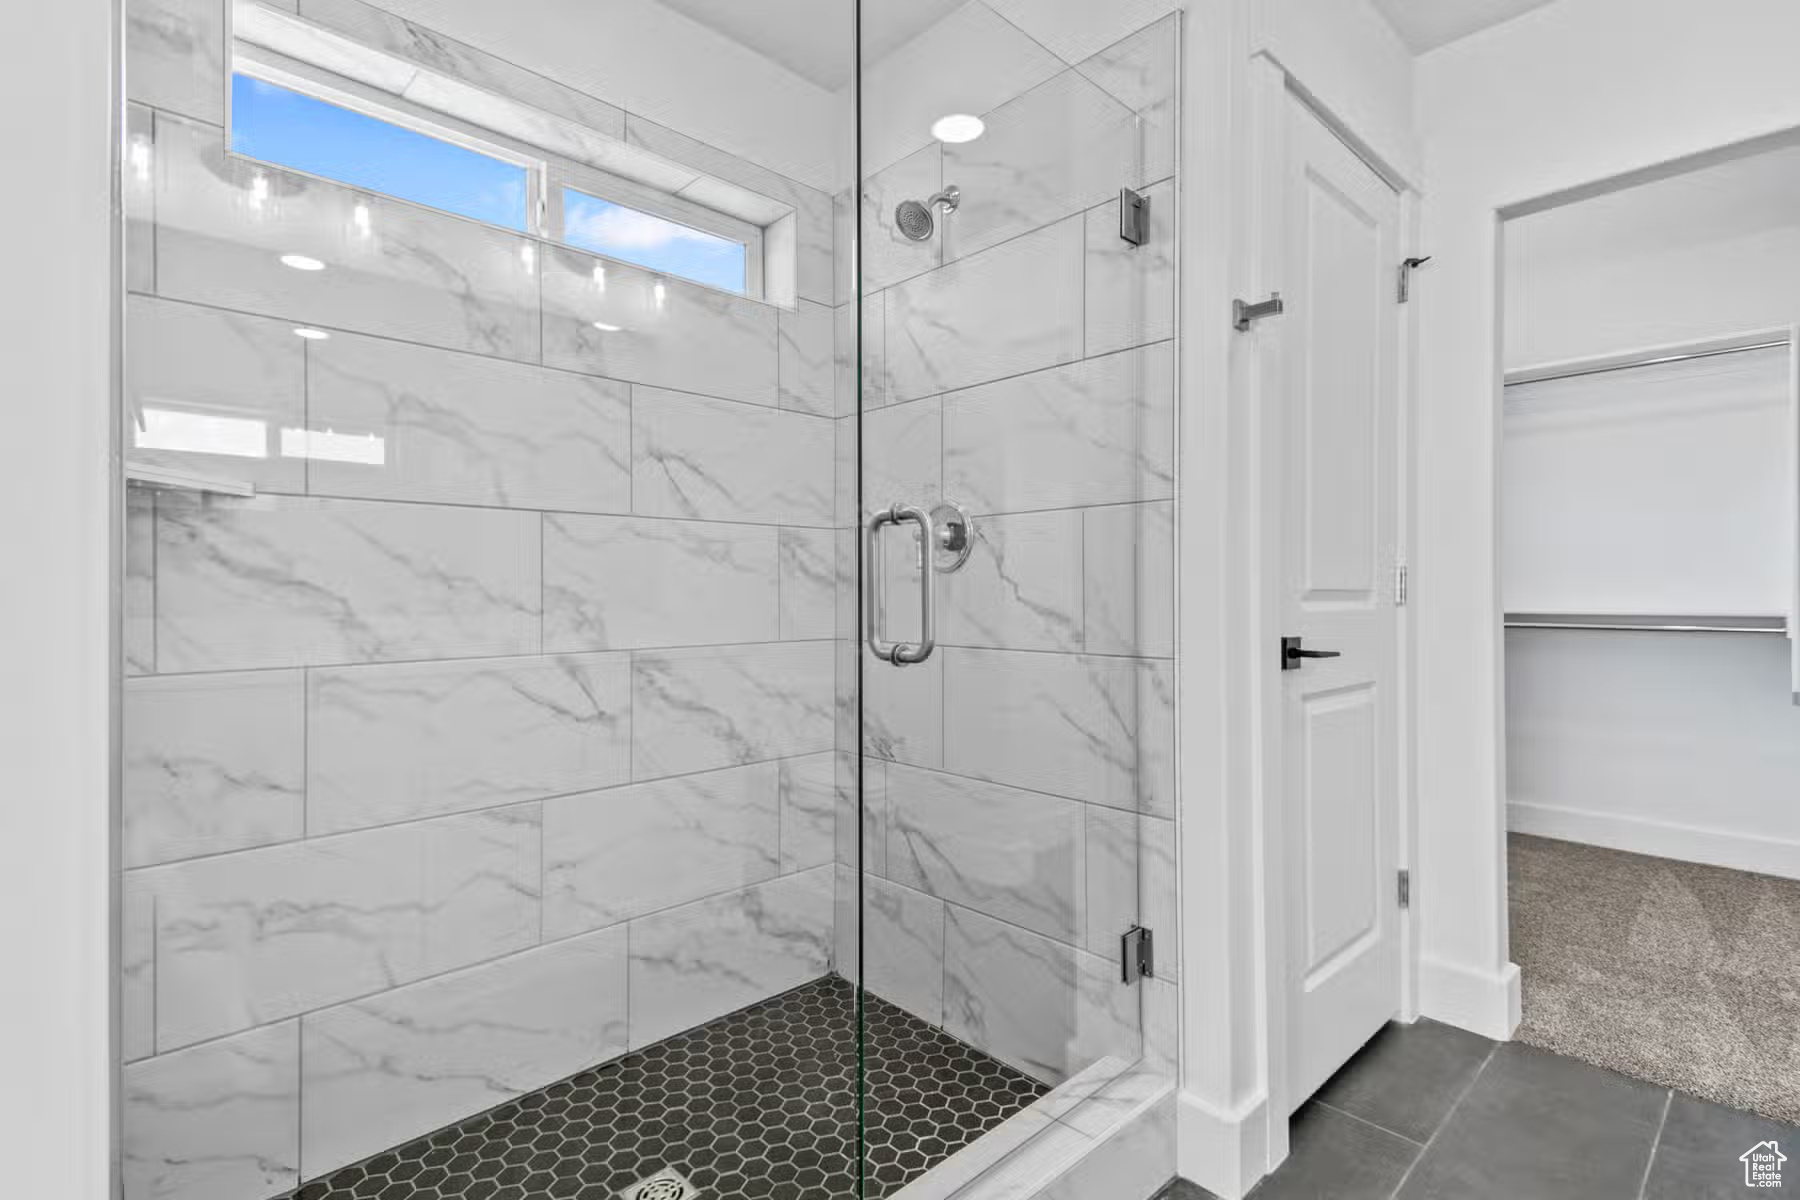 Bathroom with tile floors and a shower with shower door